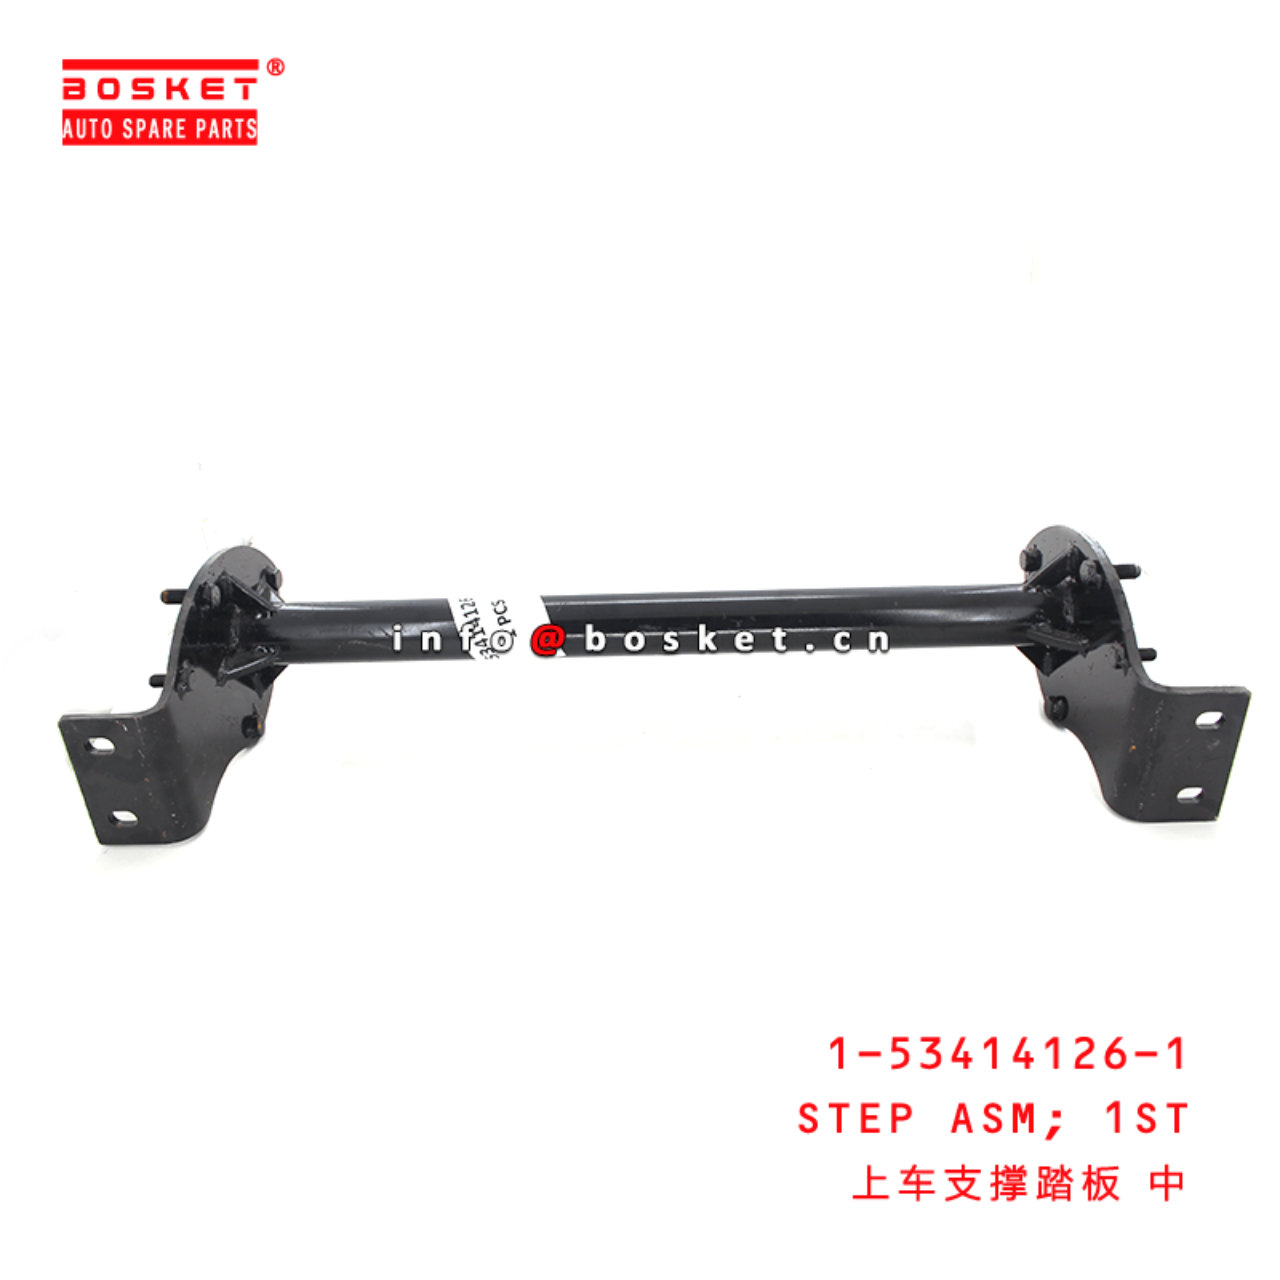  1-53414126-1 First Step Assembly 1534141261 Suitable for ISUZU FVR34 